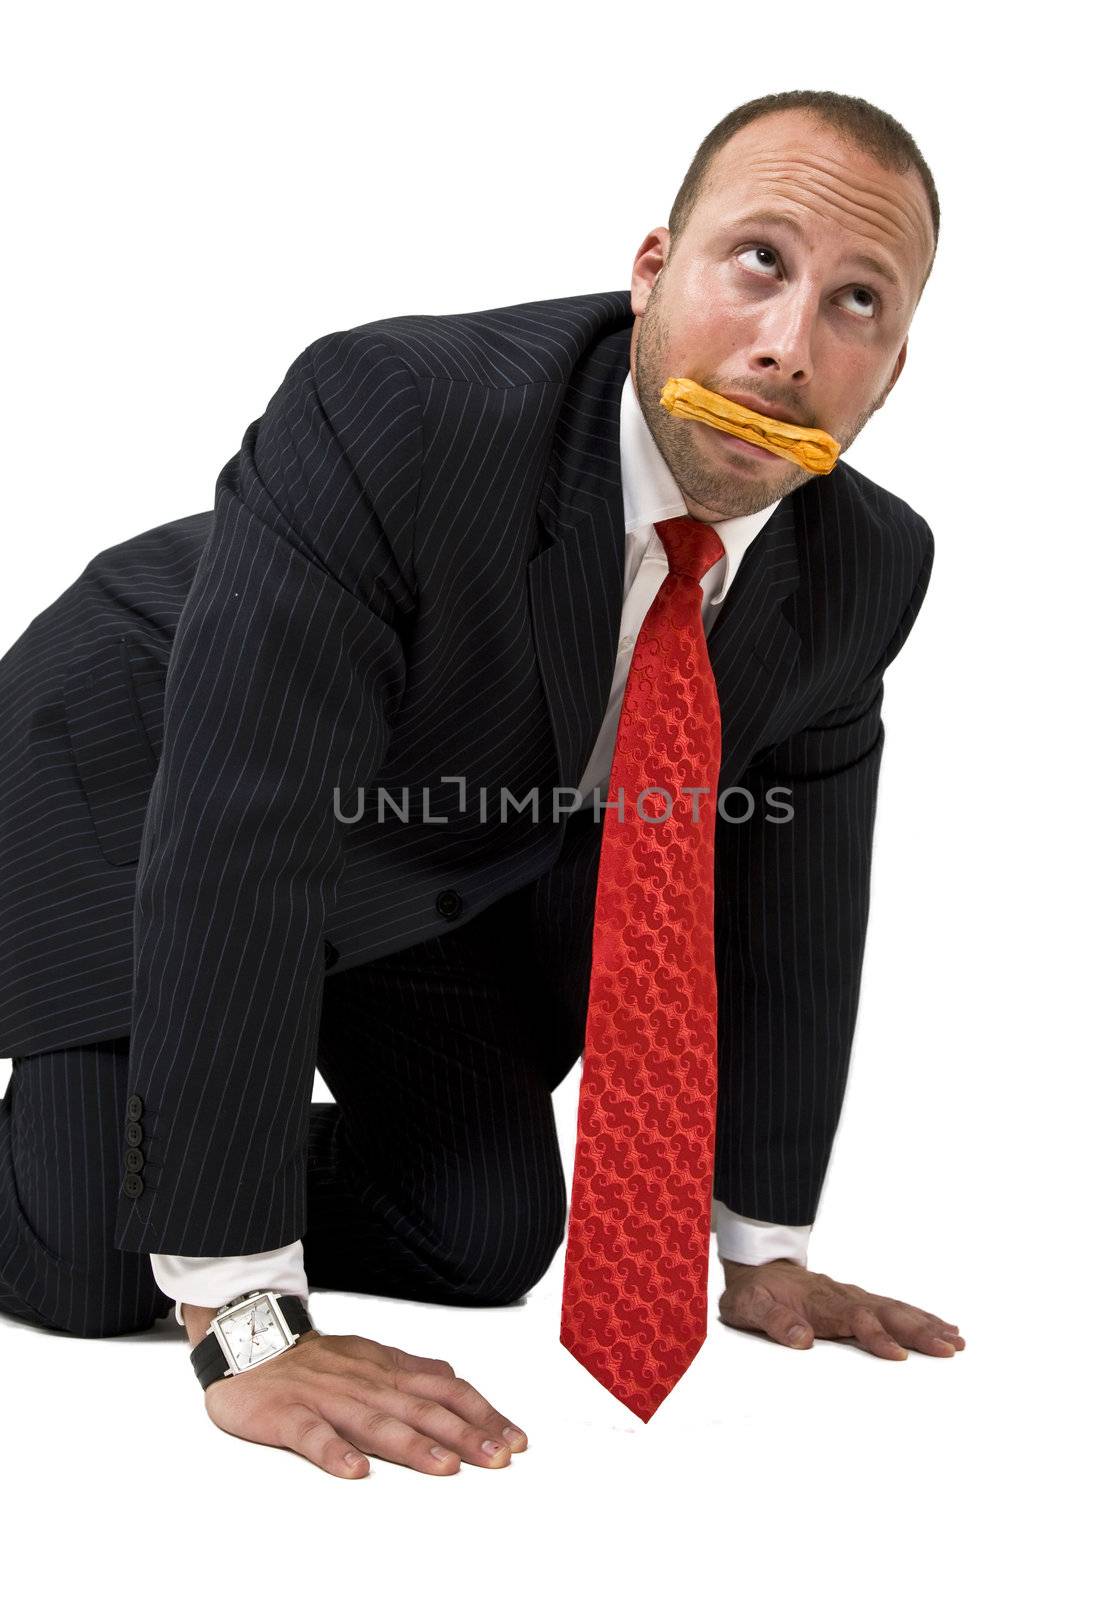 man with dog biscuit on isolated background

